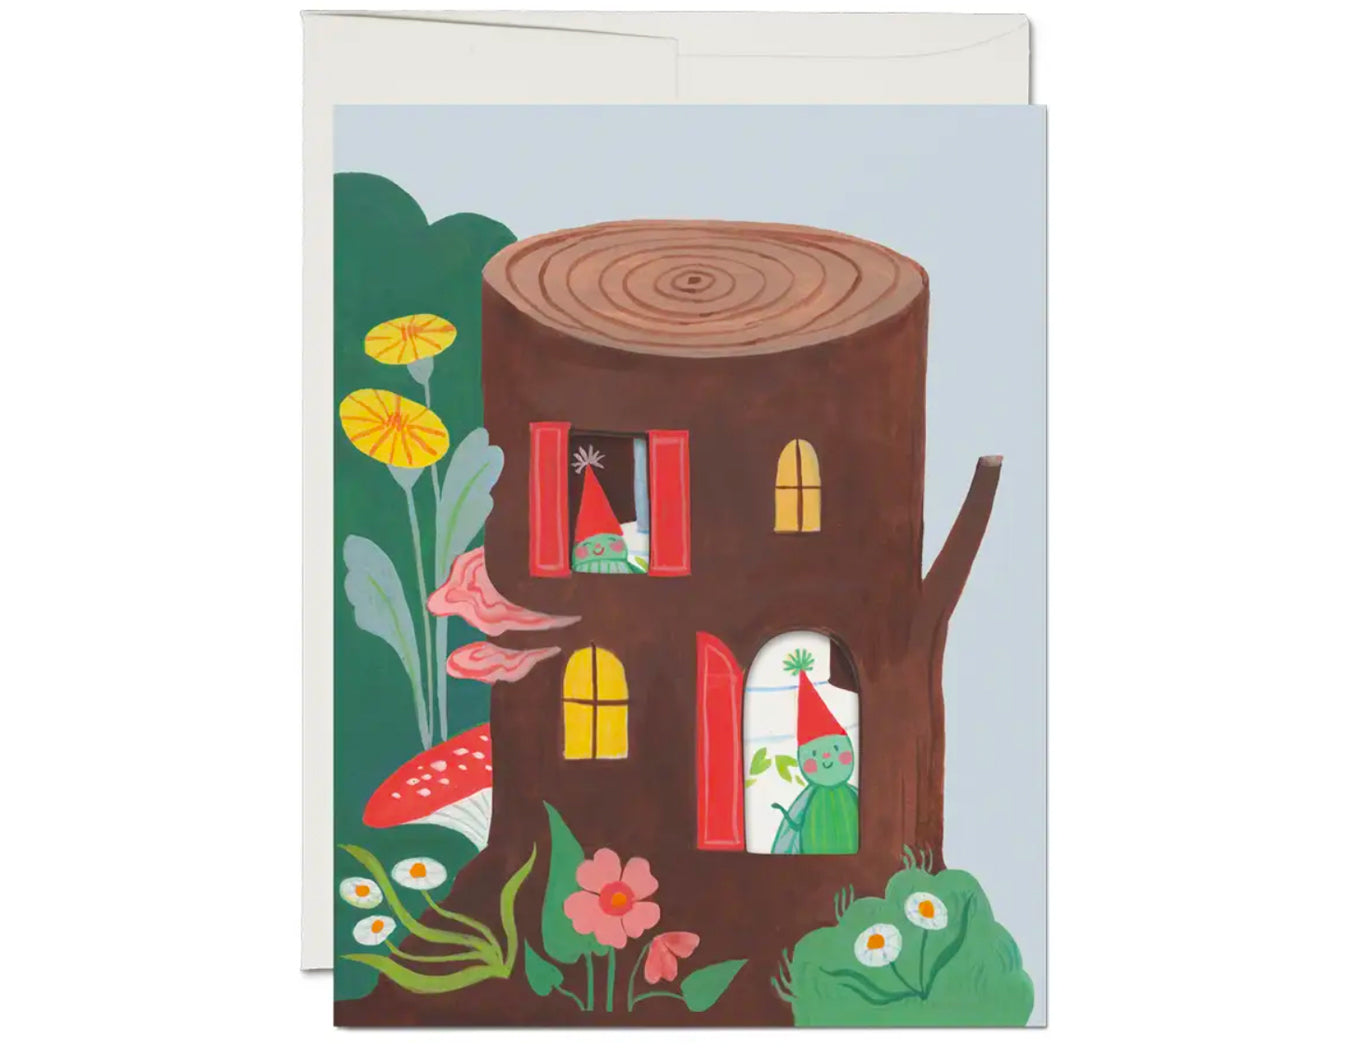 die cut birthday card featuring illustrated log, plants, and bugs